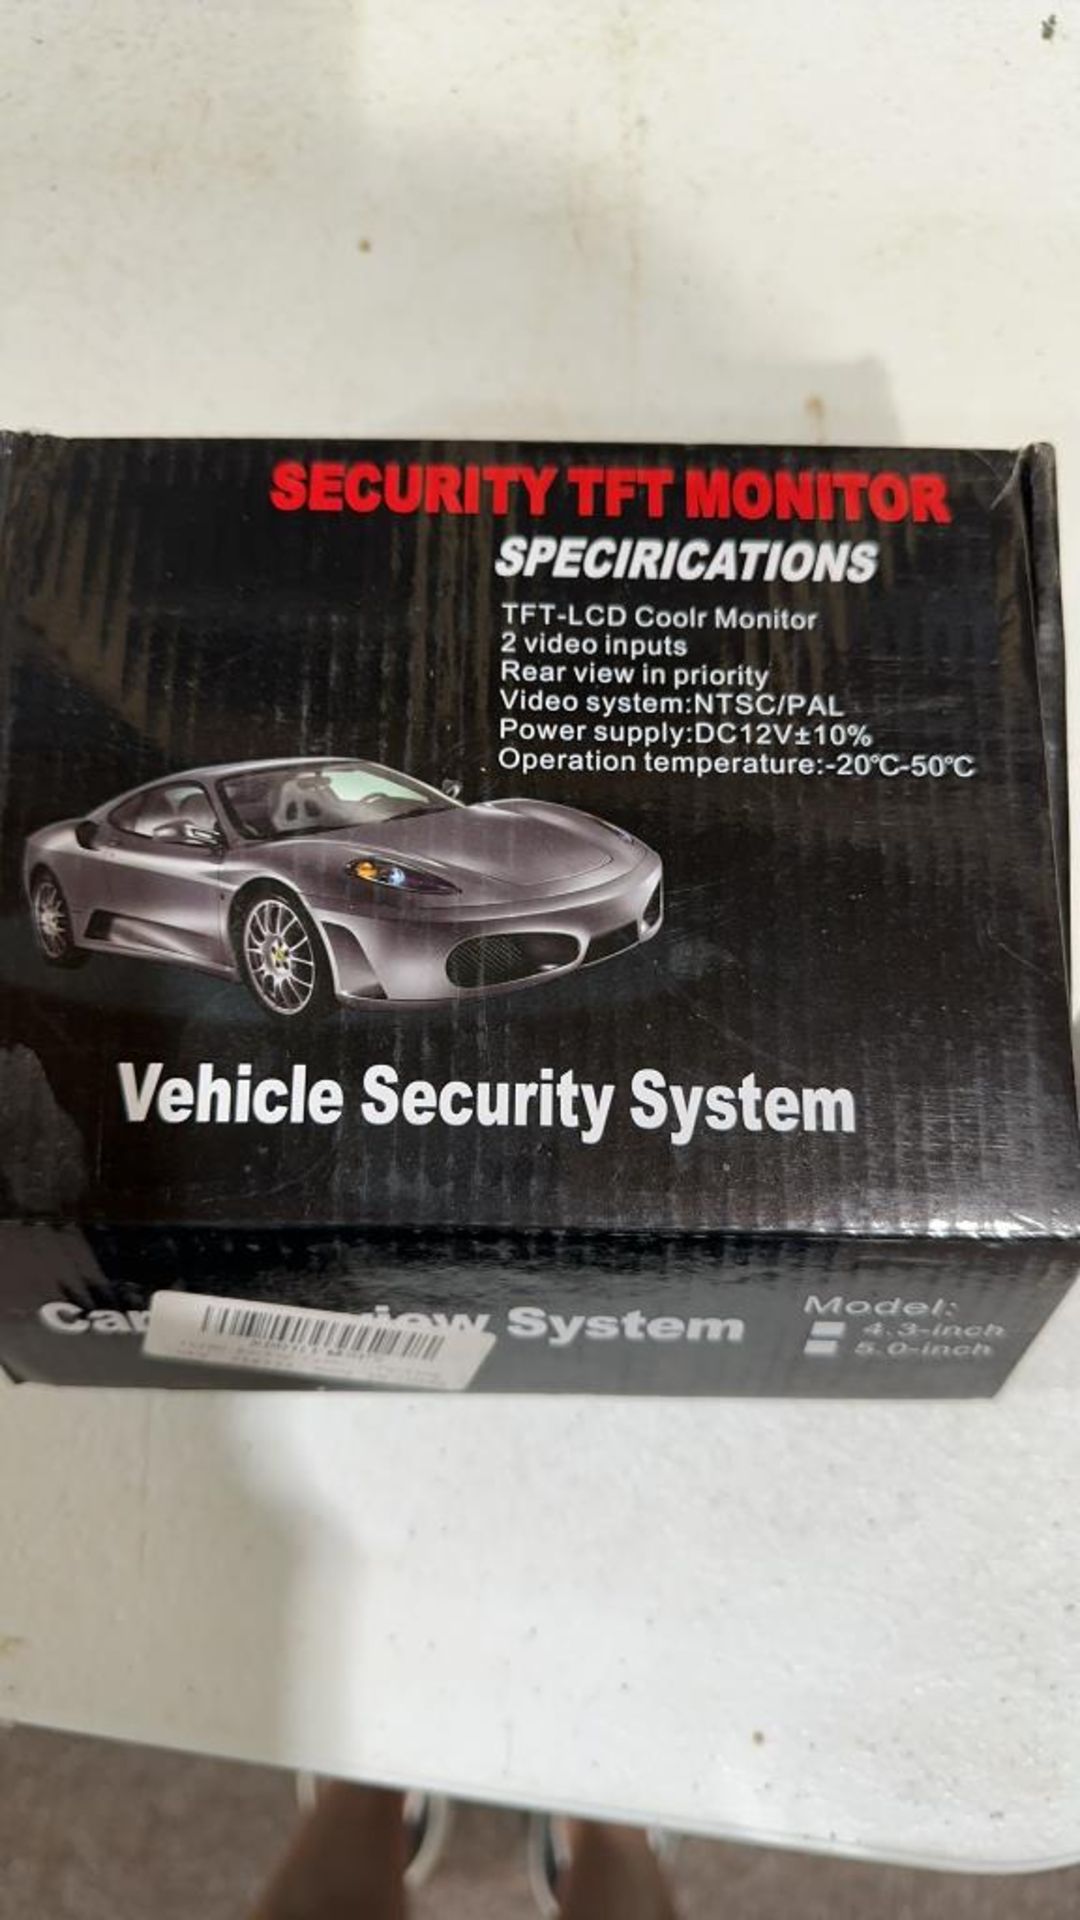 Vehicle security system - Image 2 of 12